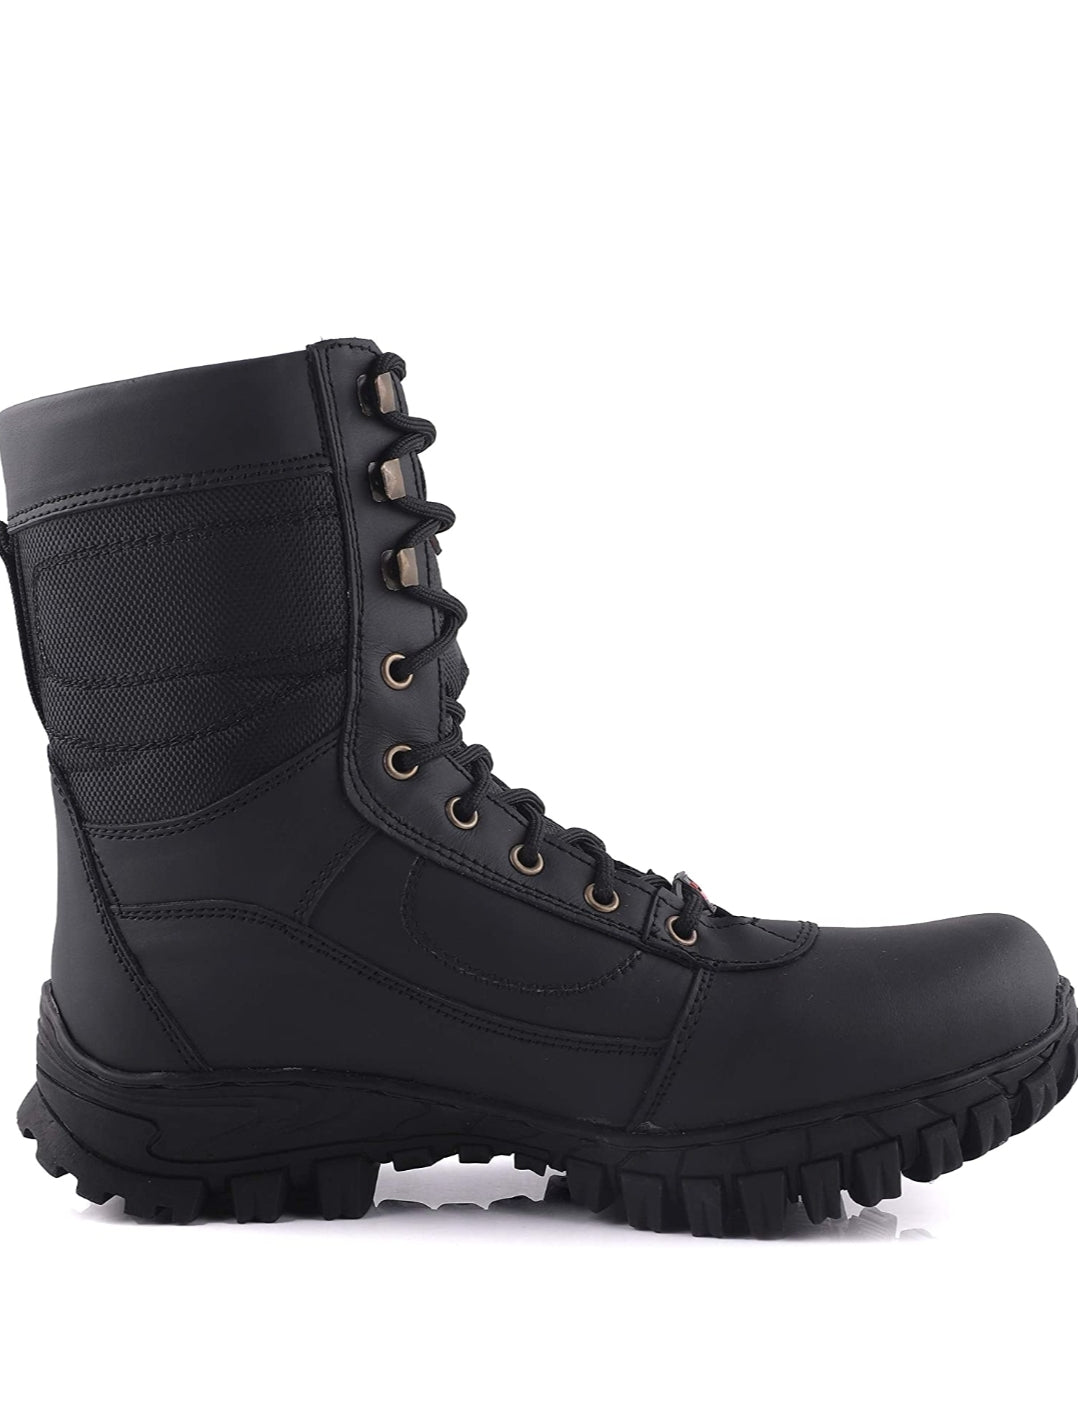 PARA TROOPER Men's Black Leather Tactical Combat Army Boot